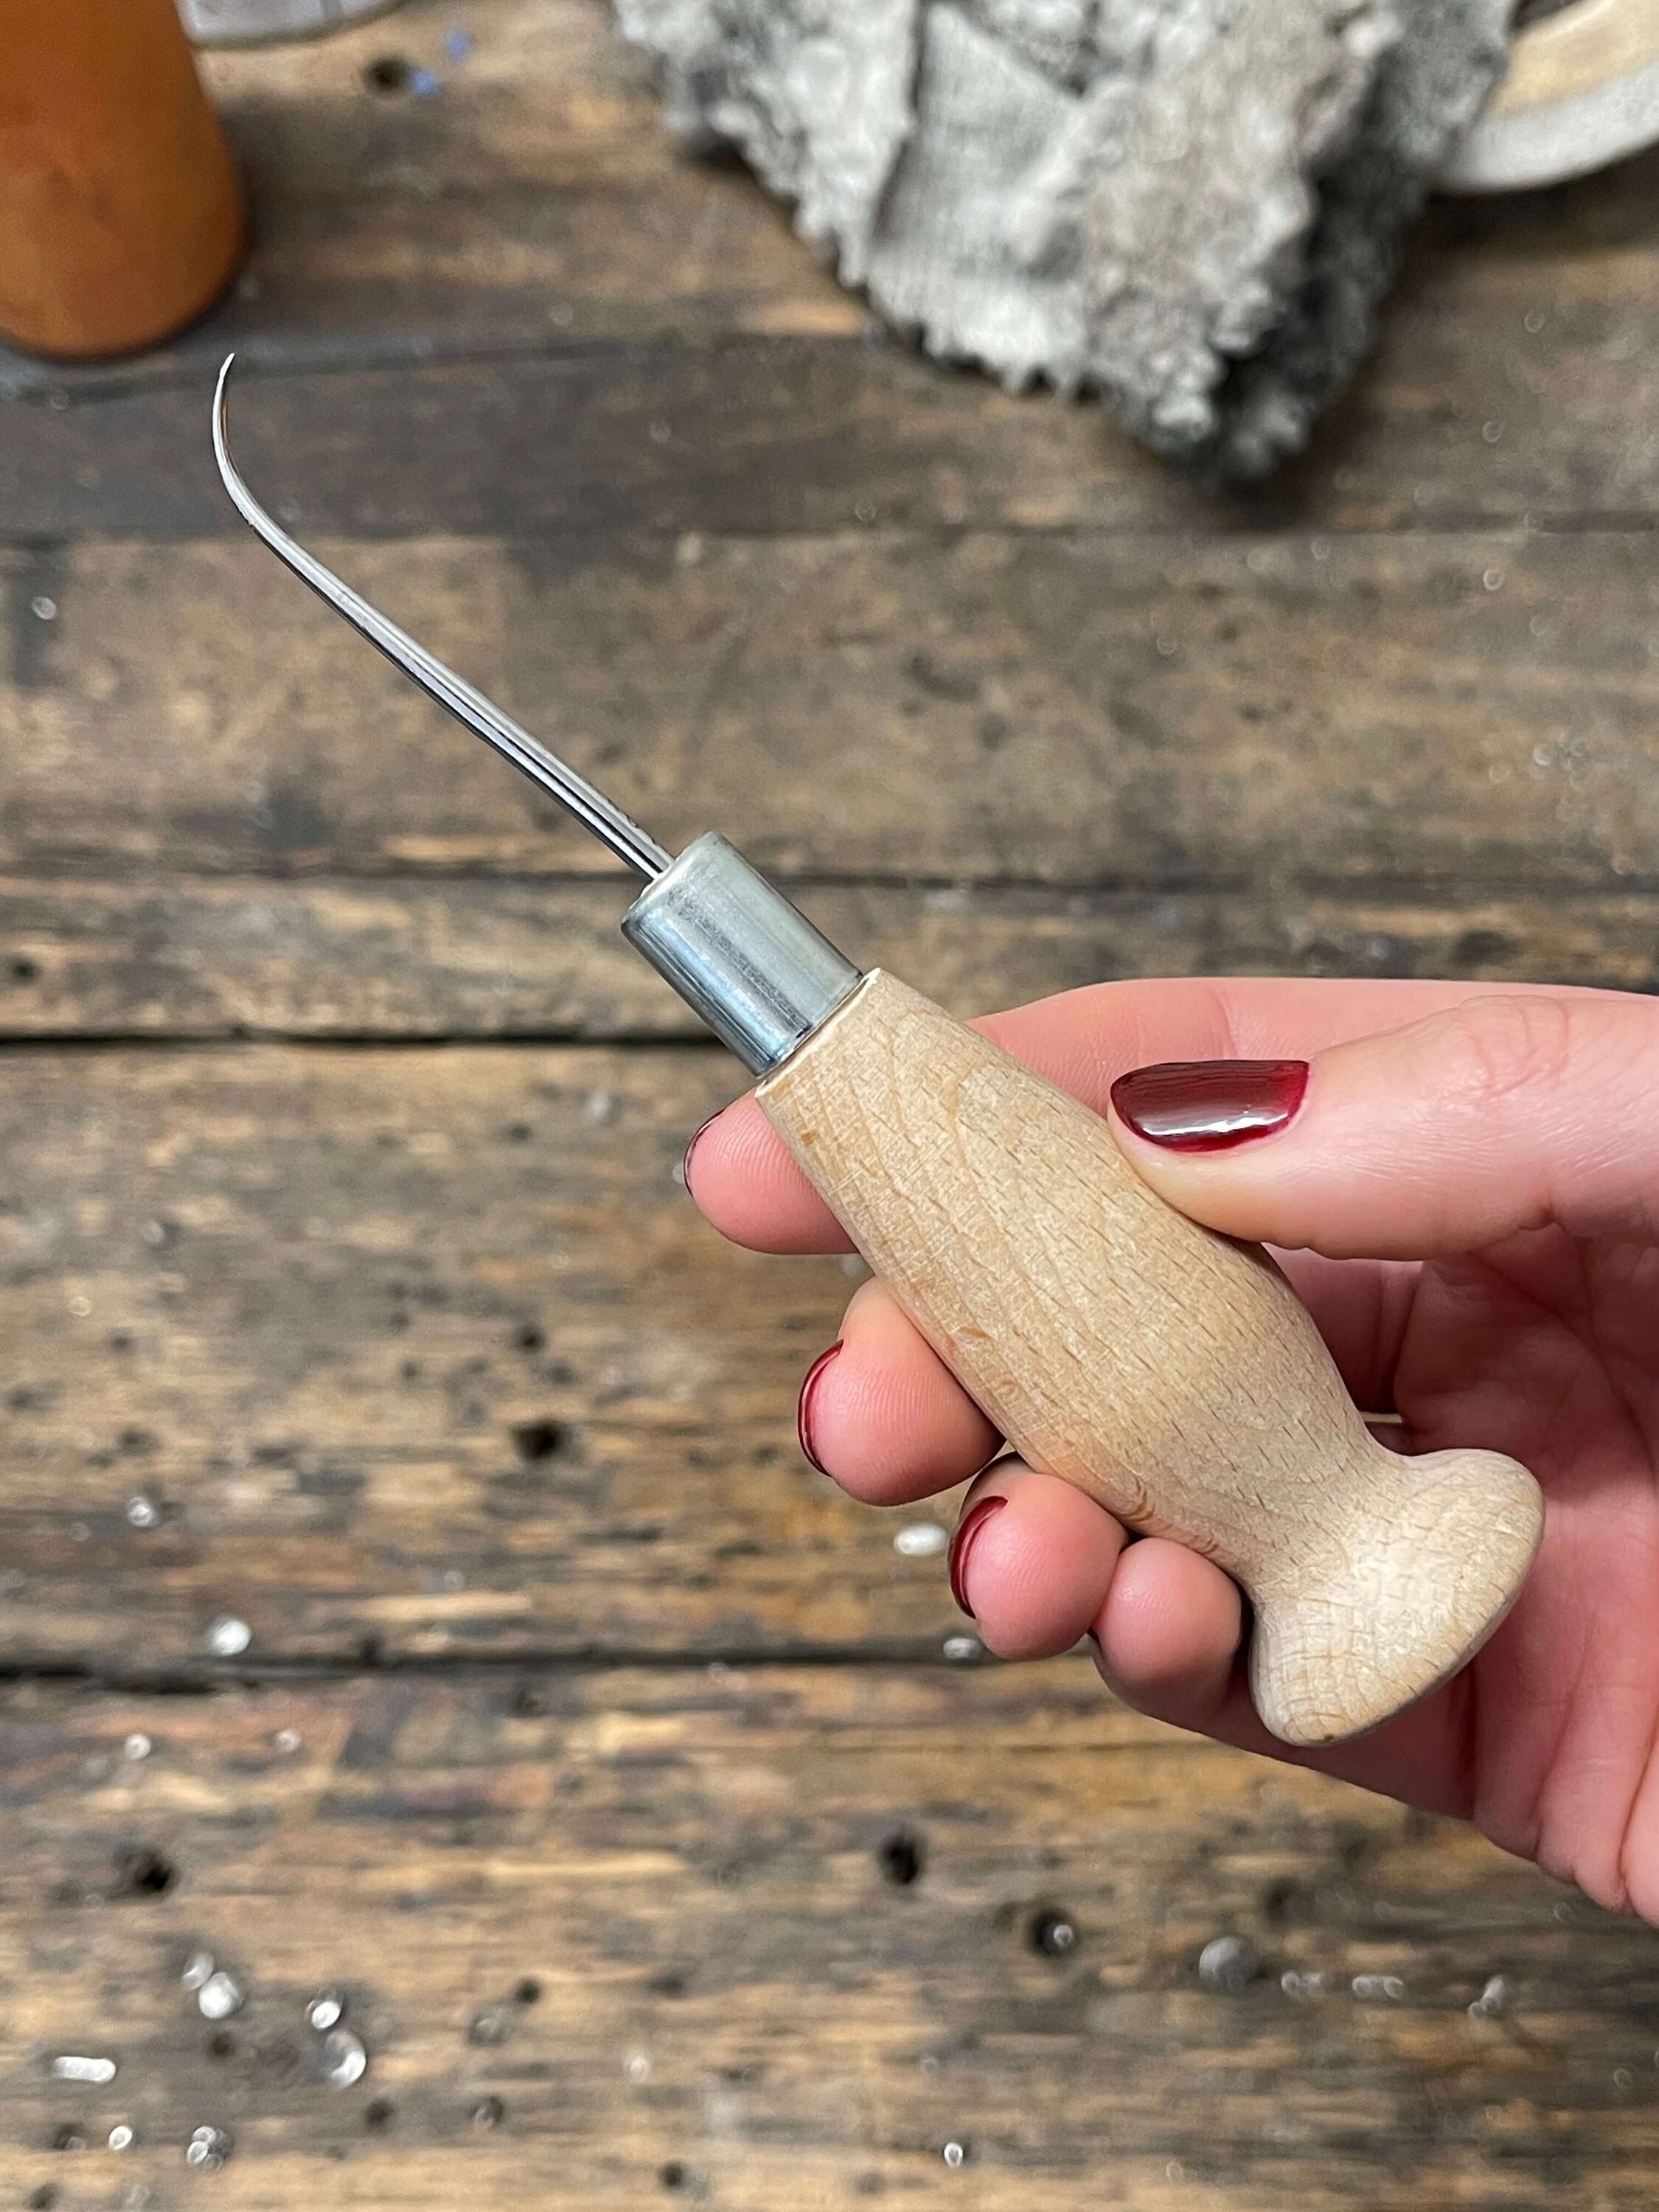 Solid Wooden Handle Awl / Leather Awl Tool Craft Sewing Punching/ Hole  Maker Stitching Overstitch / Wood Leather Tools Supplies LT022 